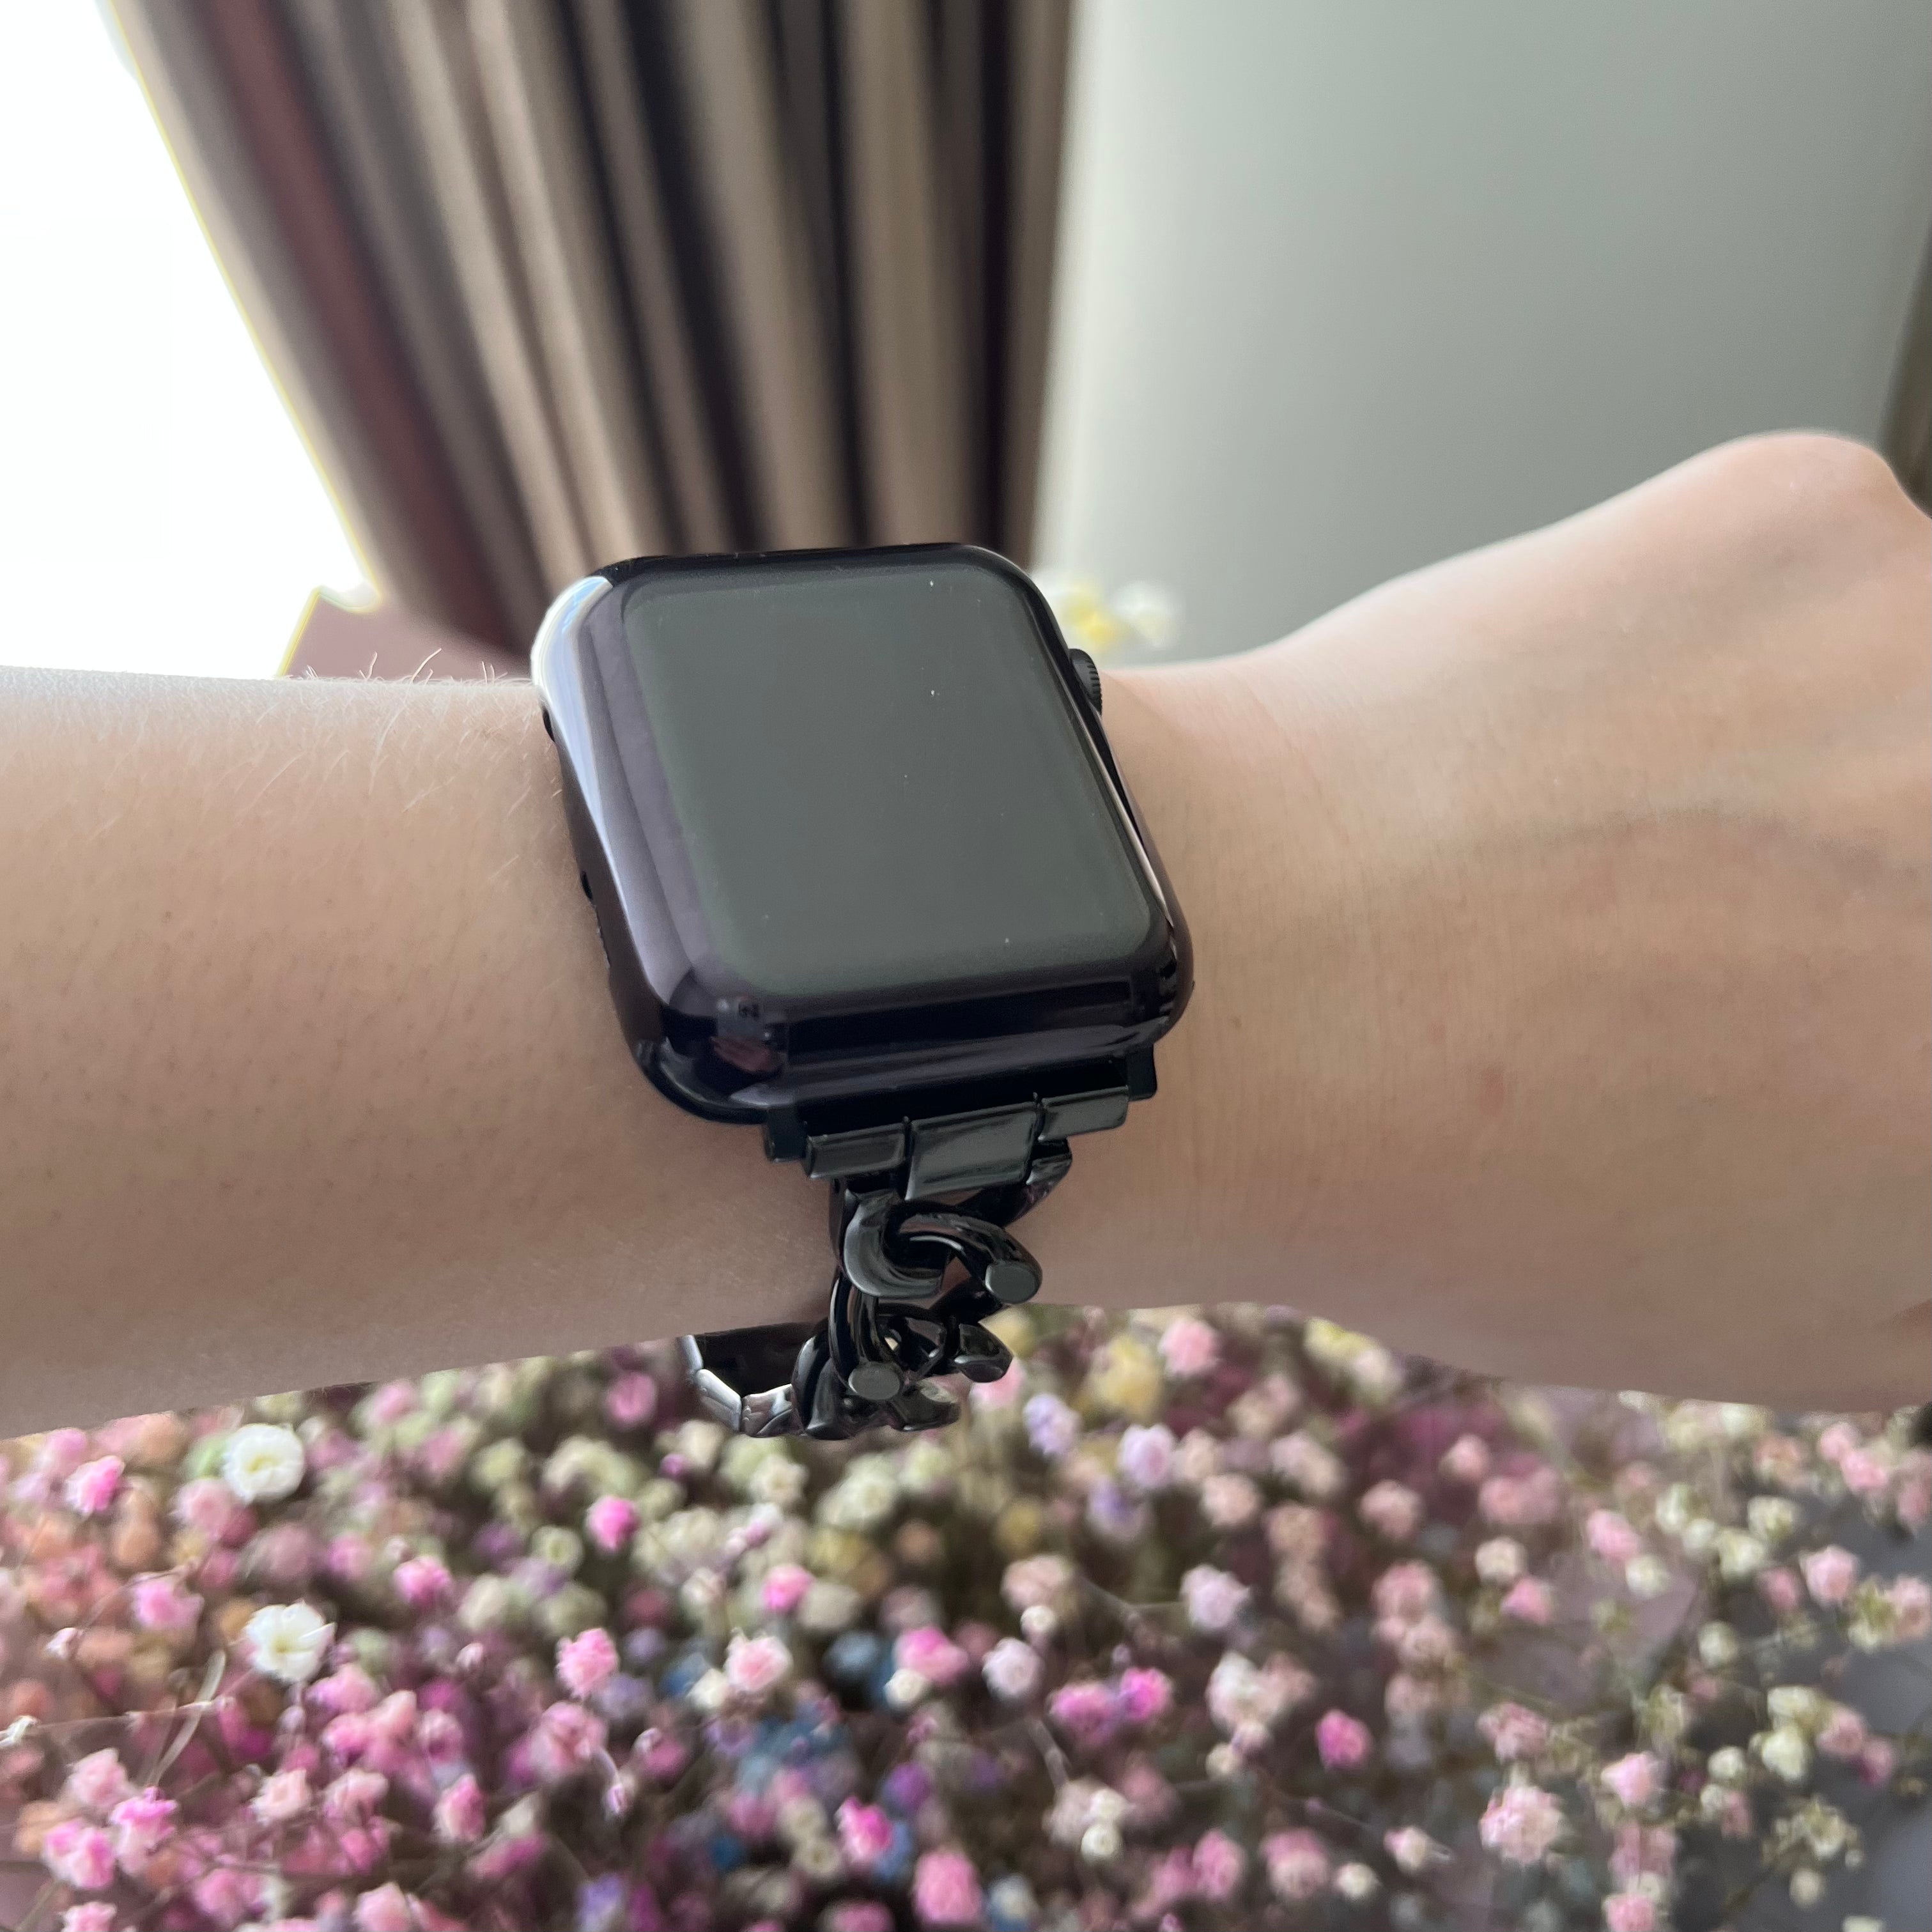 iHome Black Silicone Apple Watch Band, 38-40mm